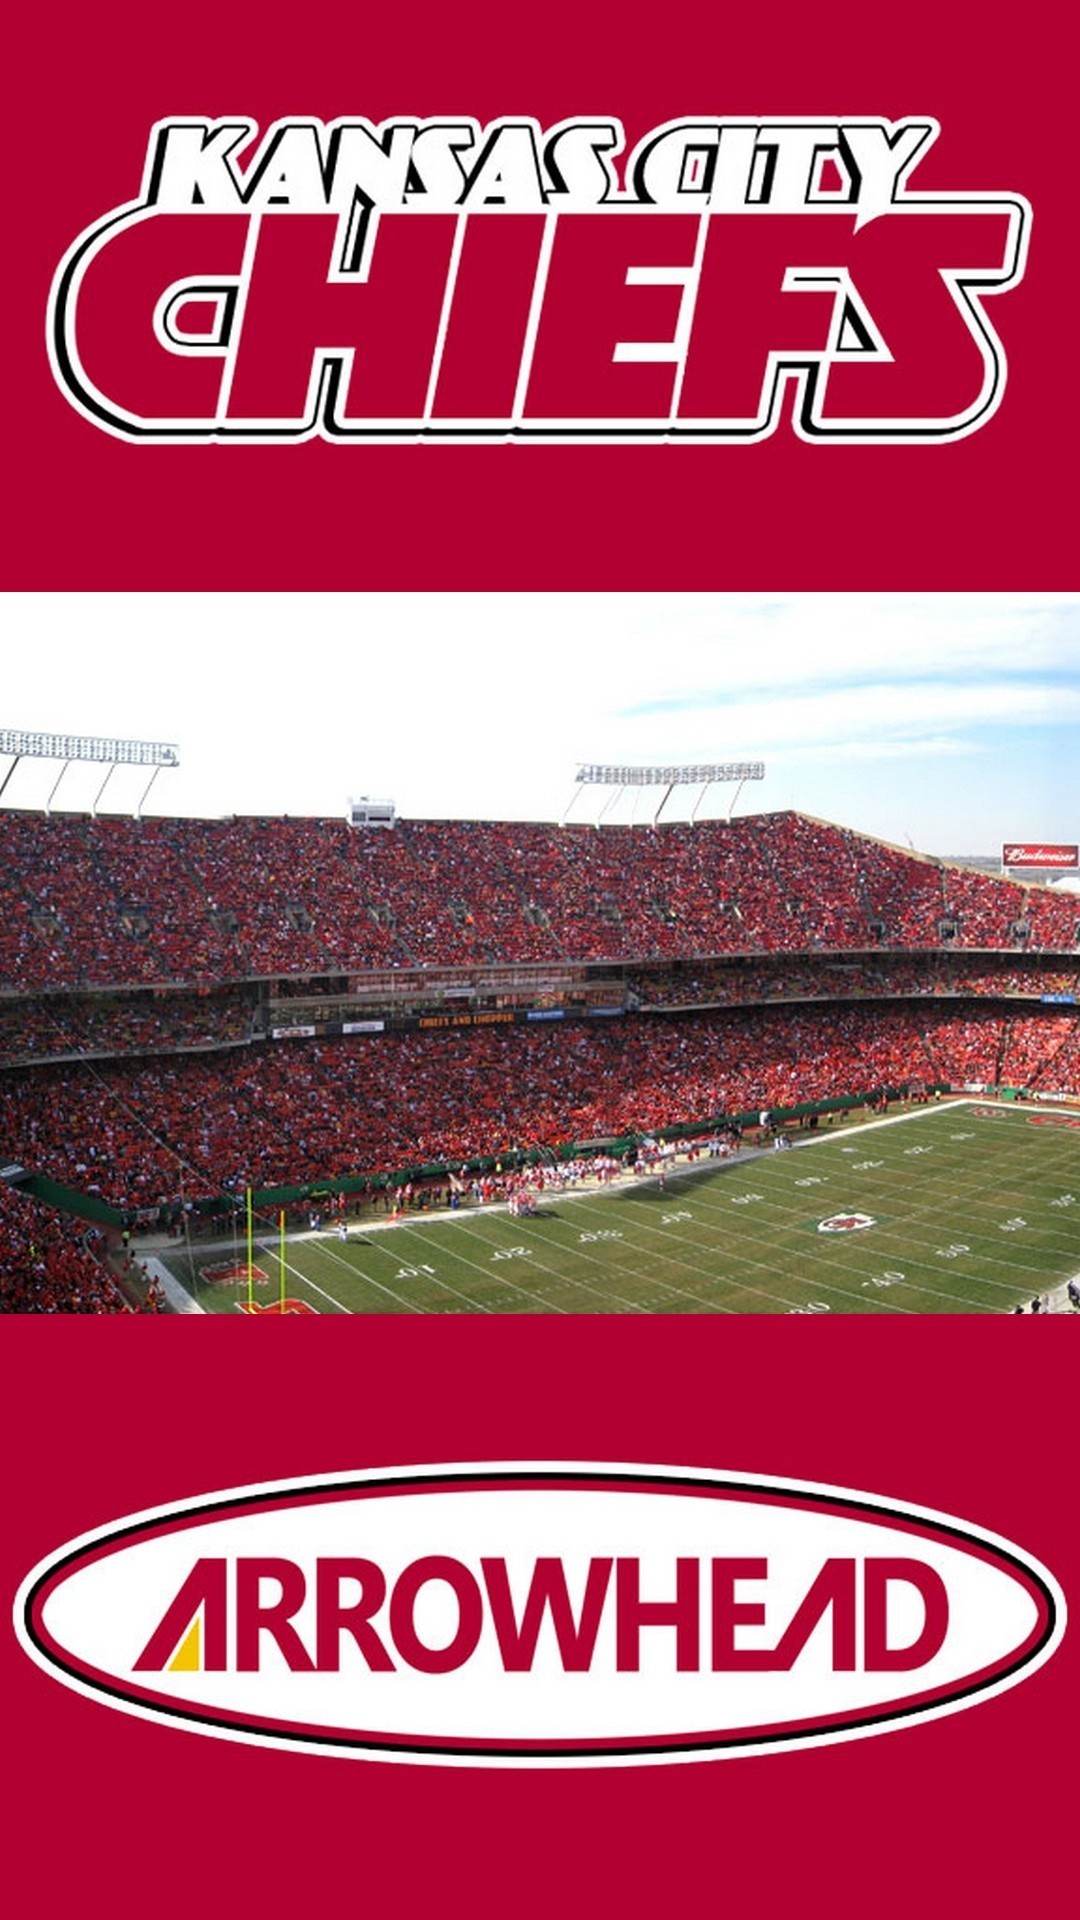 Kansas City Chiefs NFL iPhone Wallpaper in HD with high-resolution 1080x1920 pixel. Download and set as wallpaper for Desktop Computer, Apple iPhone X, XS Max, XR, 8, 7, 6, SE, iPad, Android